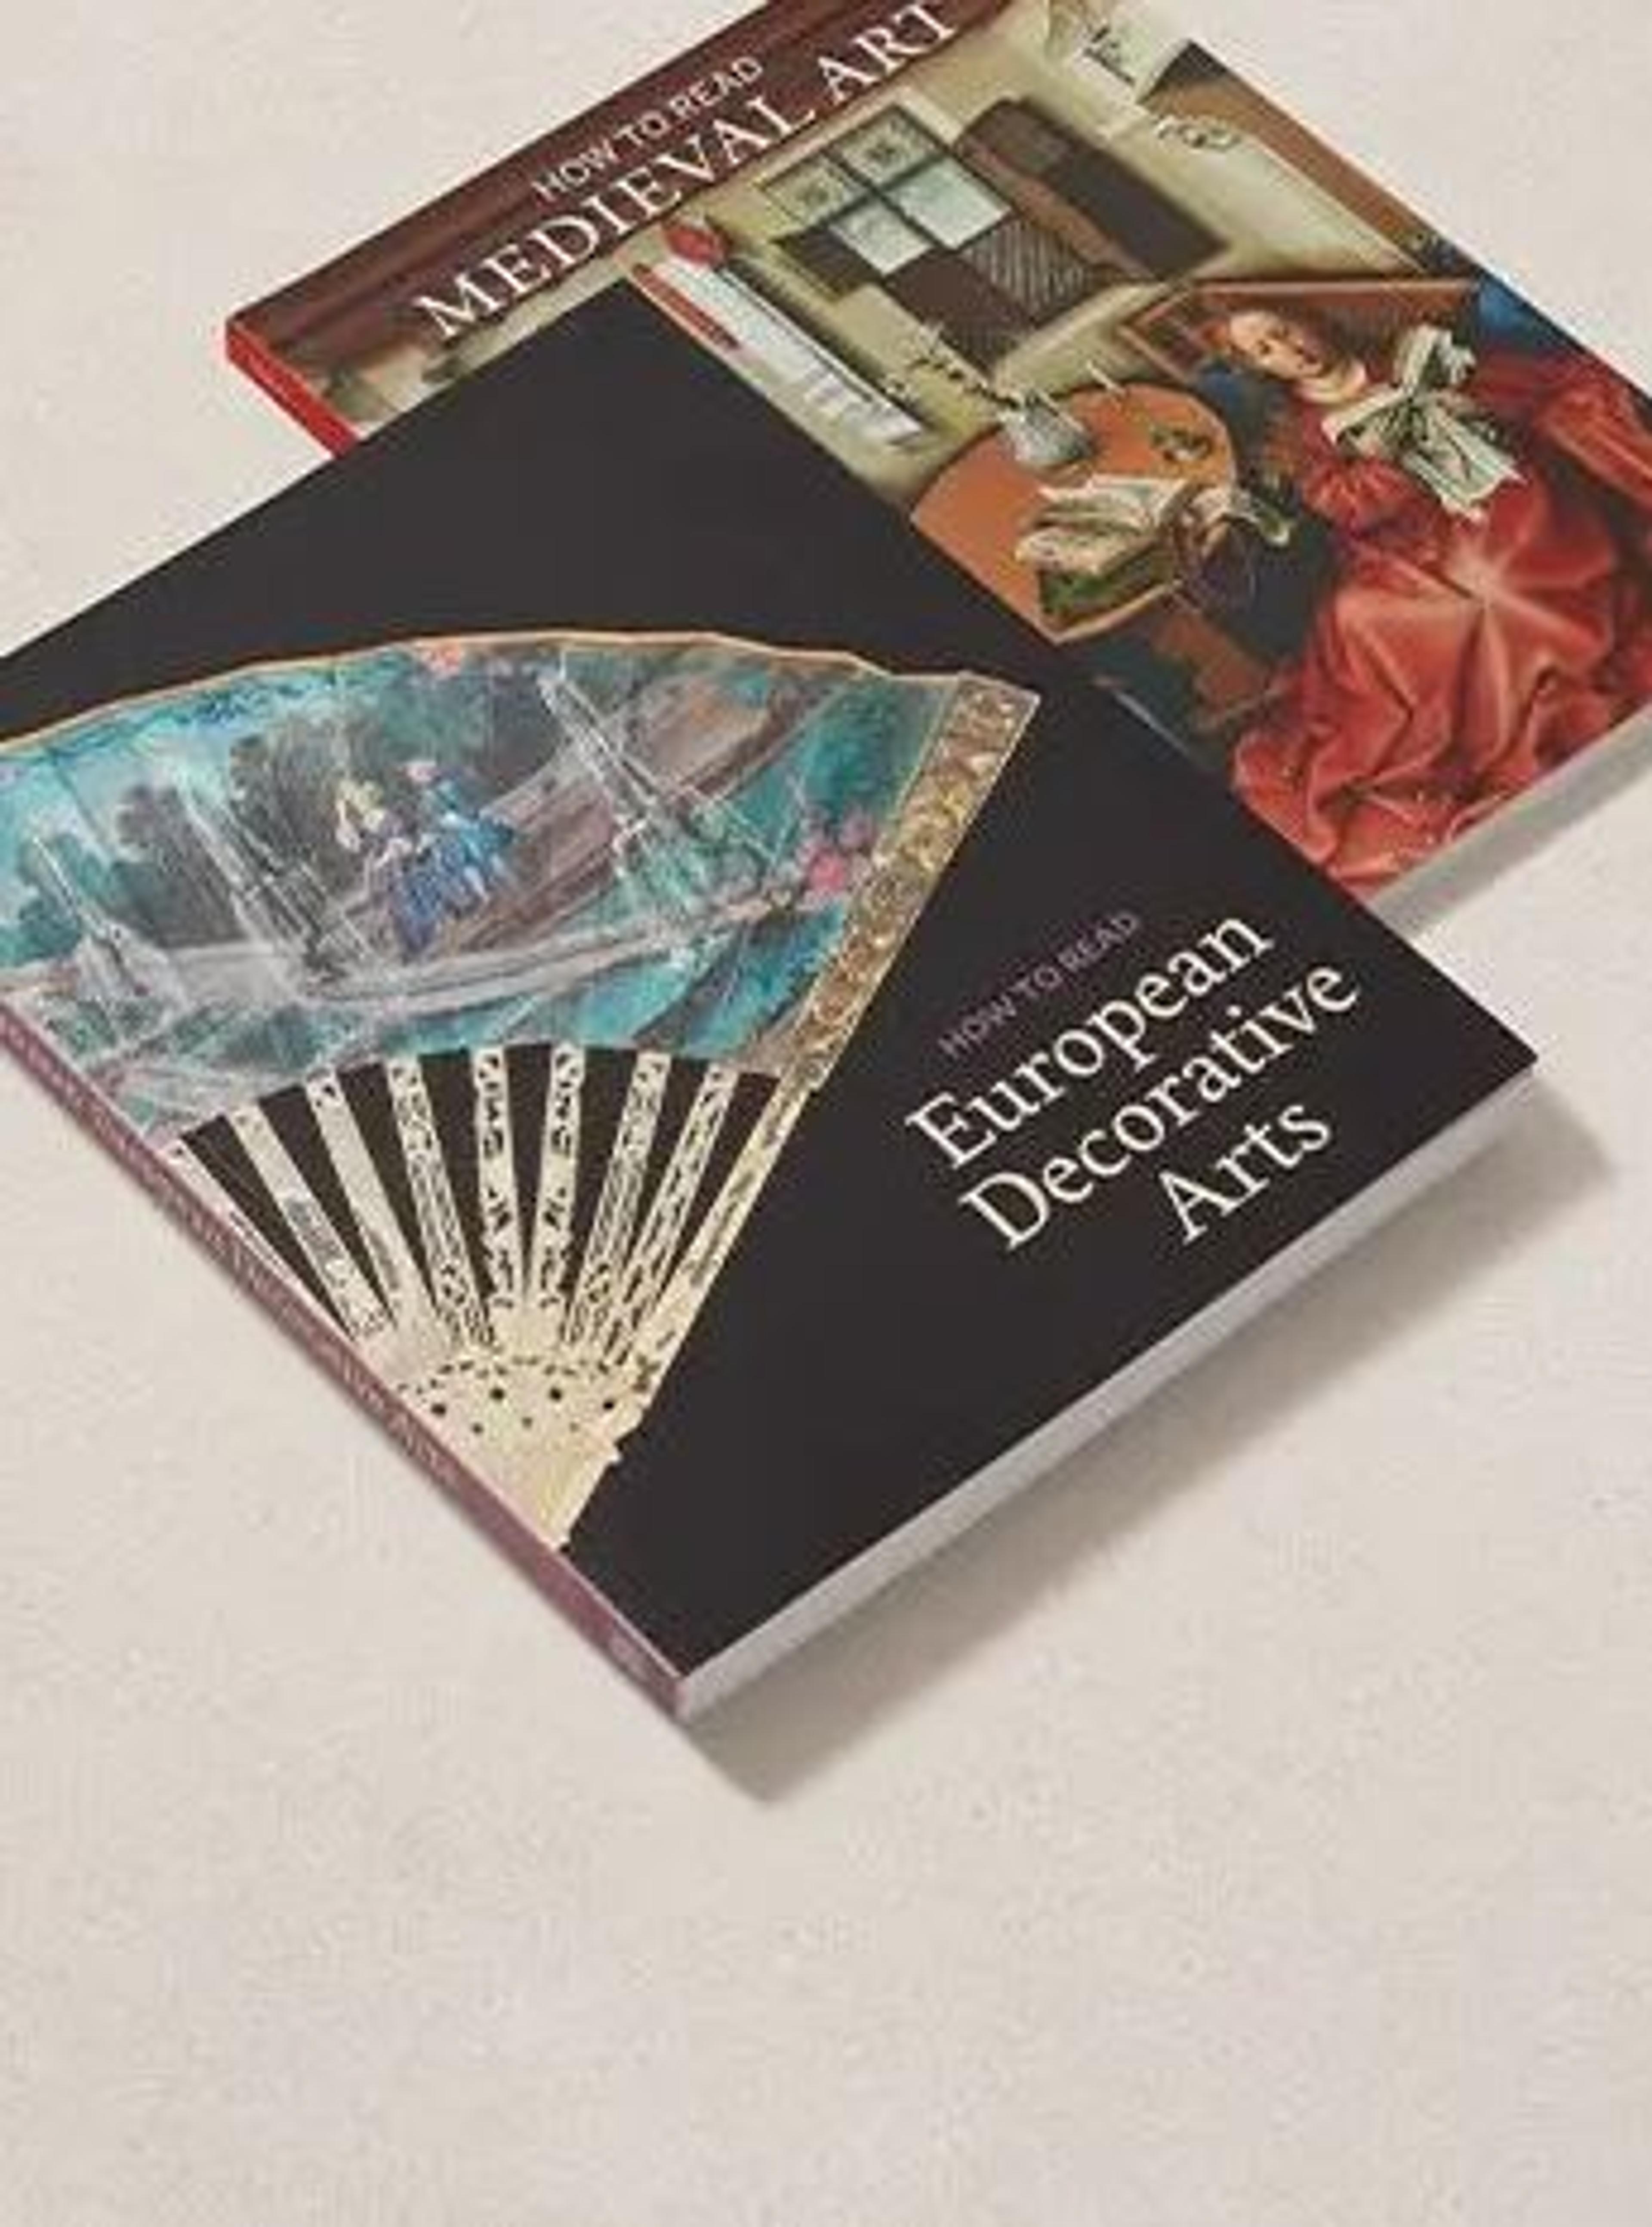 Two Met titles: How to Read European Decorative Arts and How to Read Medieval Art